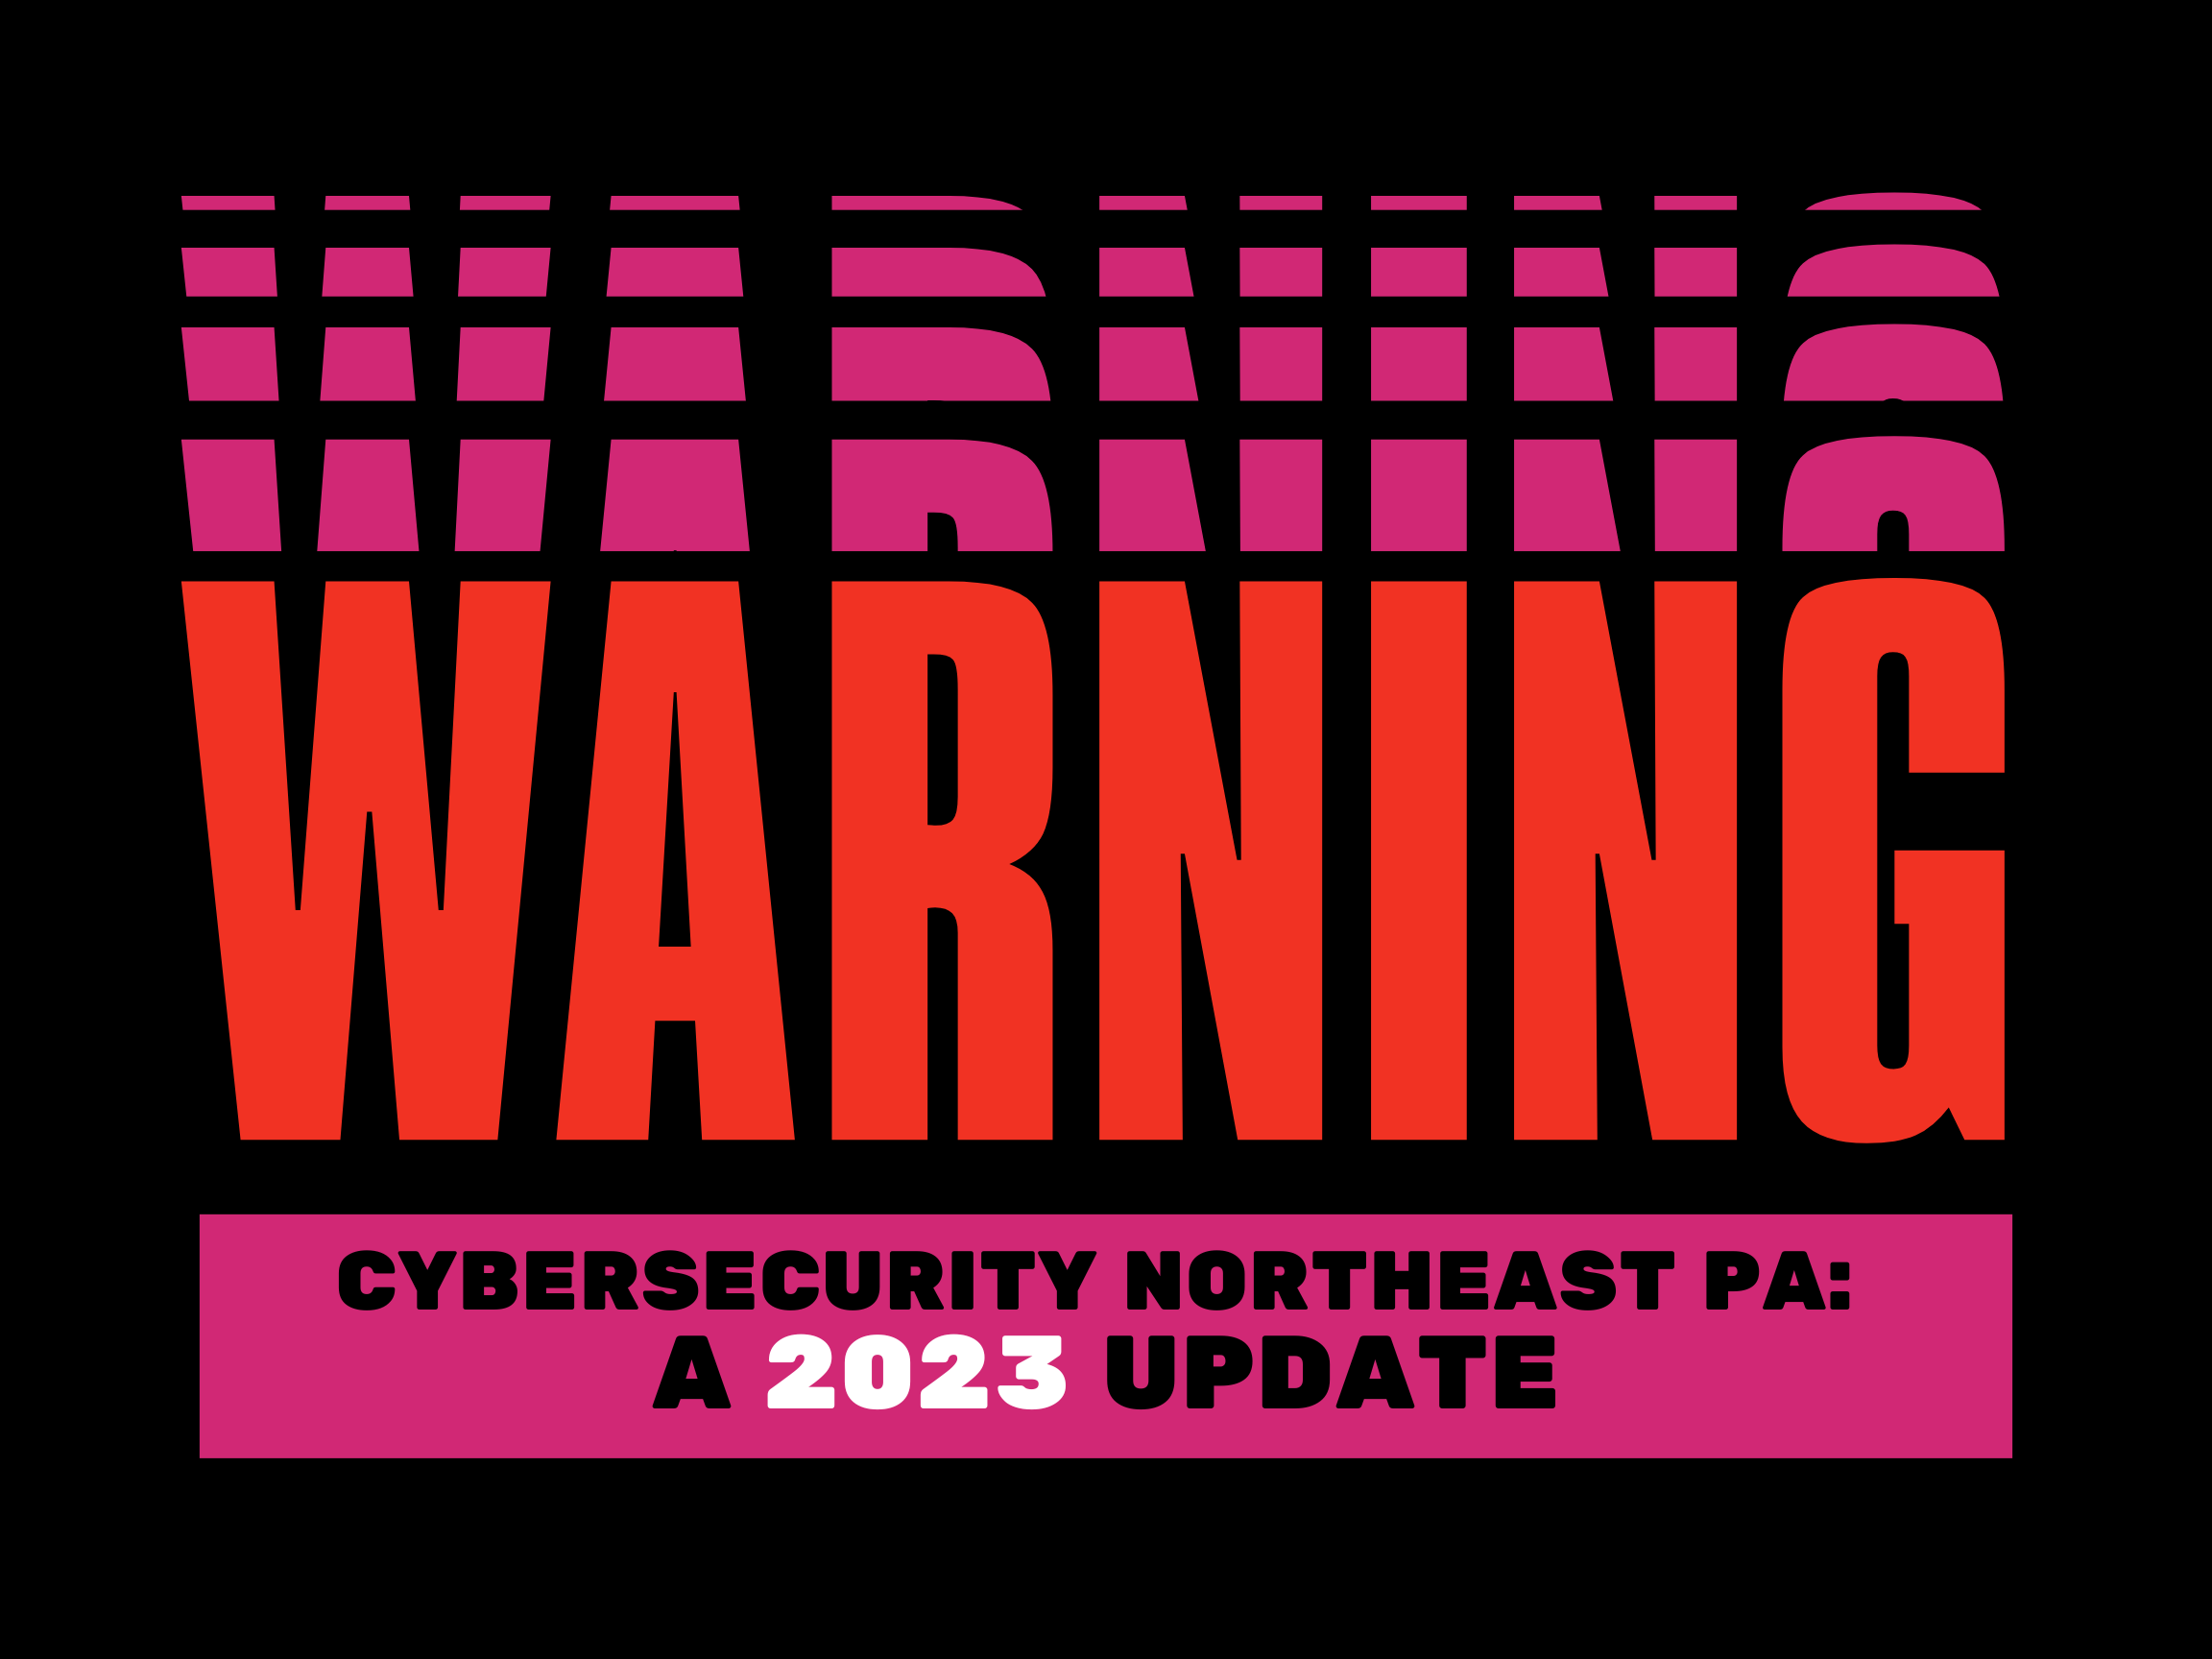 NEPA Cybersecurity offered by IT managed services companies in Philadelphia like Slick Cyber Systems